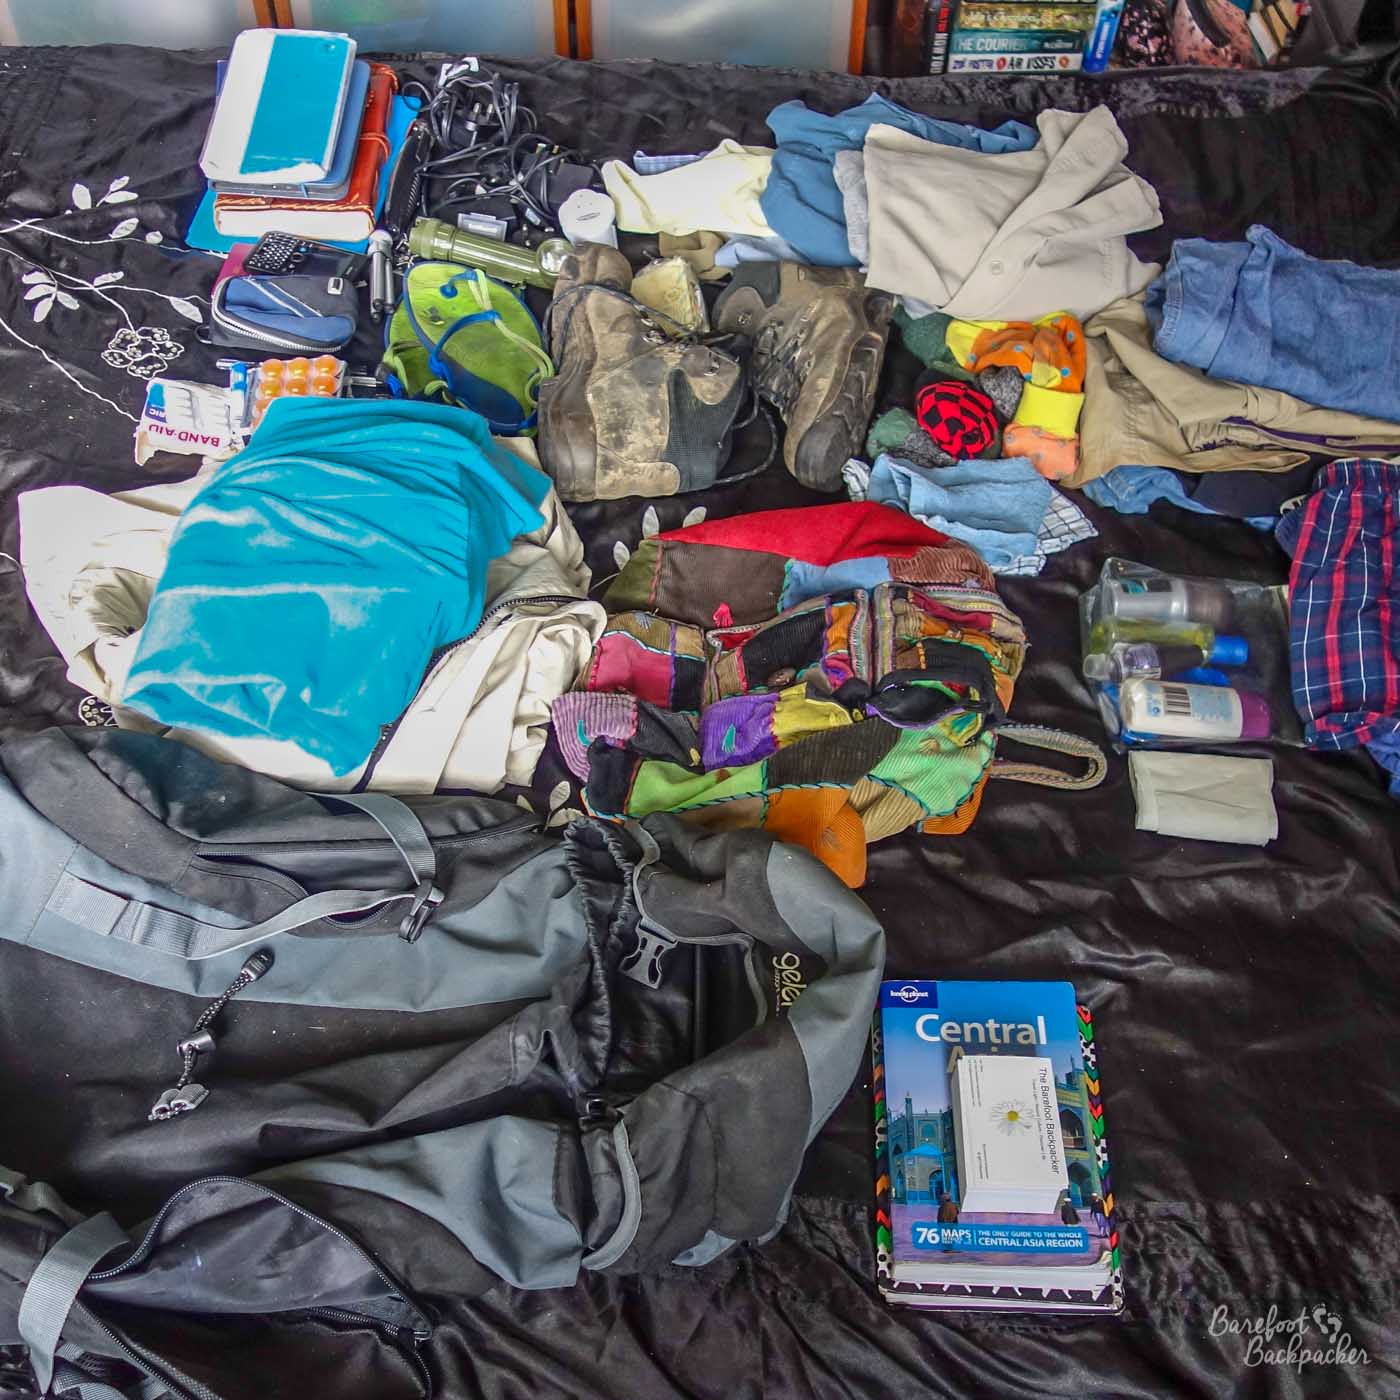 On a bed are lots of items, including separate piles of types of clothing, a pair of walking boots, a backpack, some paper/pads/pens, electrical items, and a guidebook to Central Asia. Probably a couple of packing mistakes here.